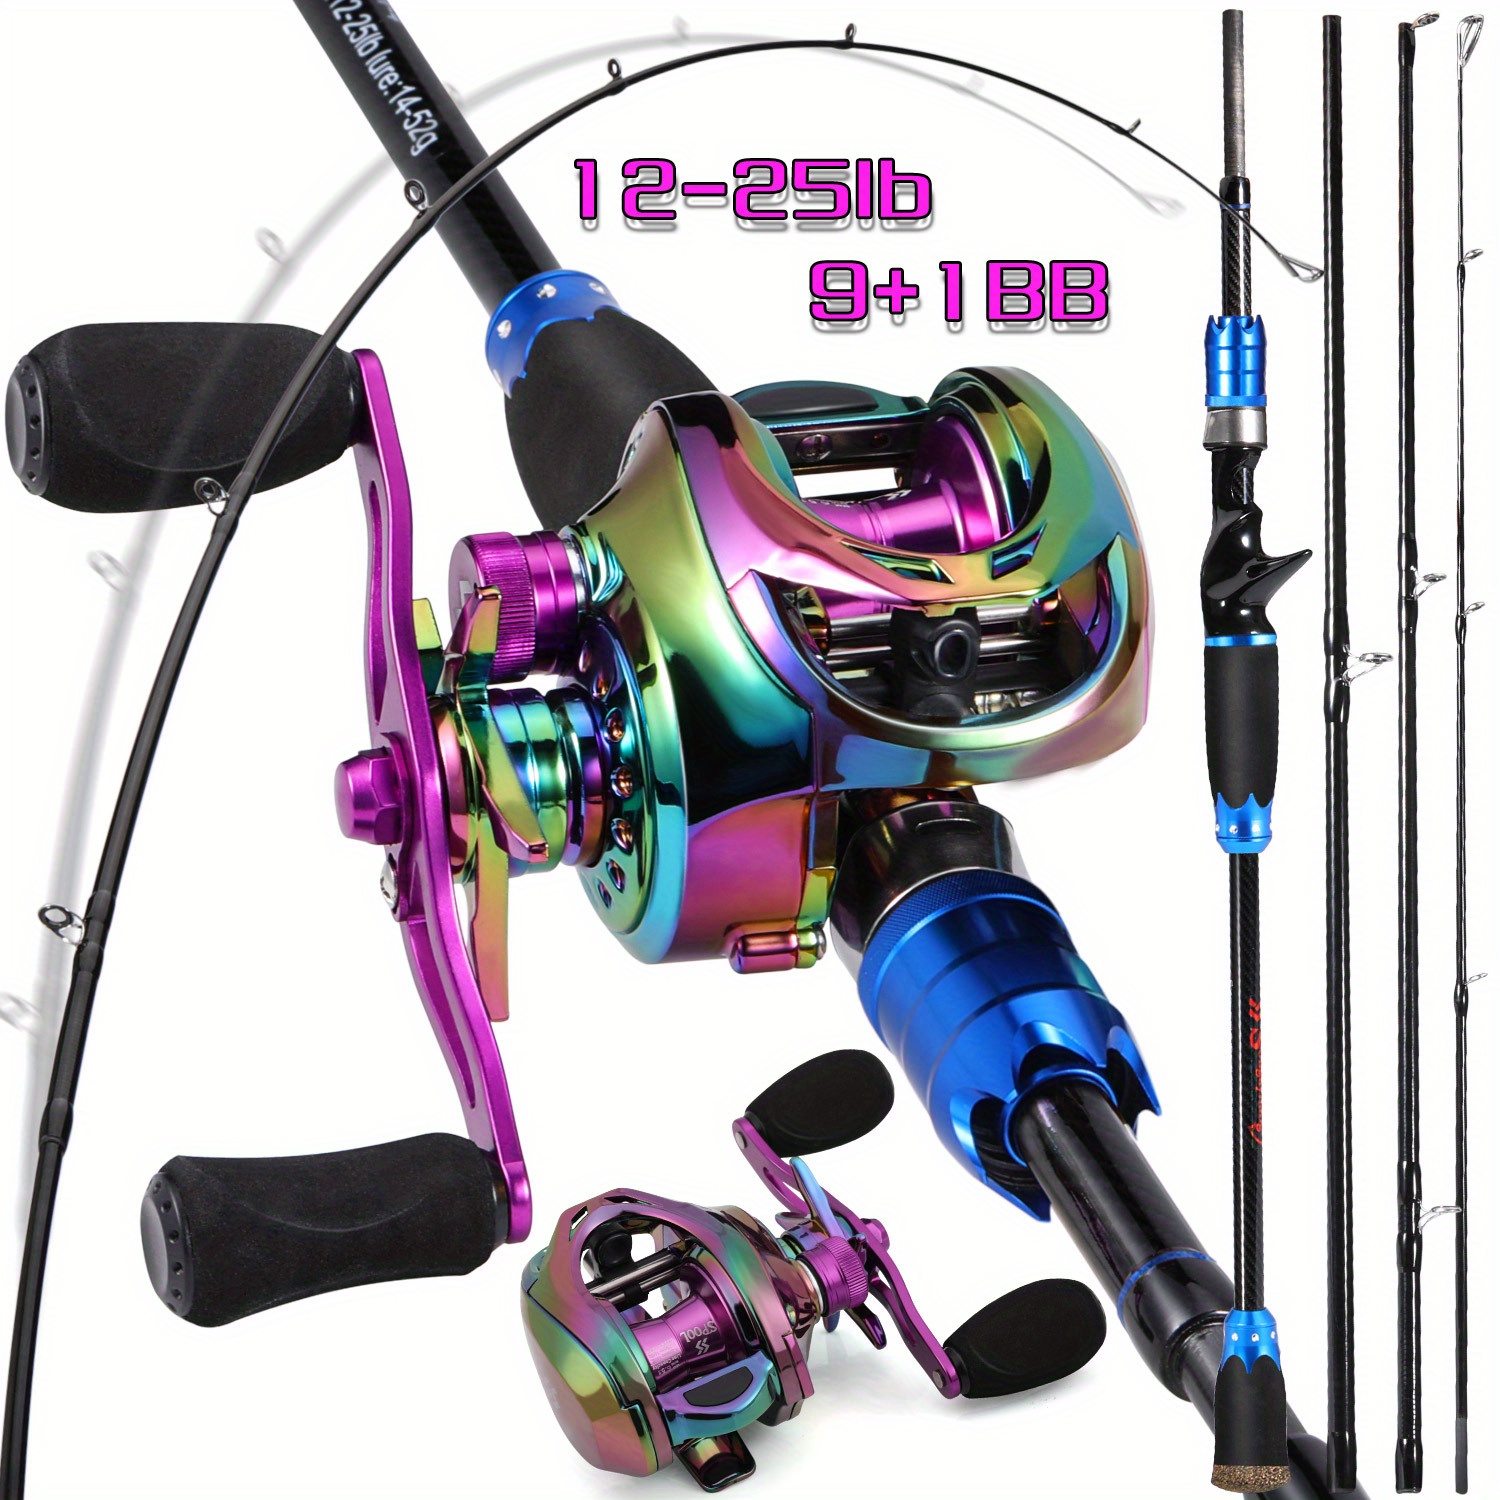 Spinning Reel and Fishing Rod Combo, 6-Foot 2-Piece Fishing Pole, Purple Fishing  reel Fisching reel Baitcaster rod and reel ка - AliExpress